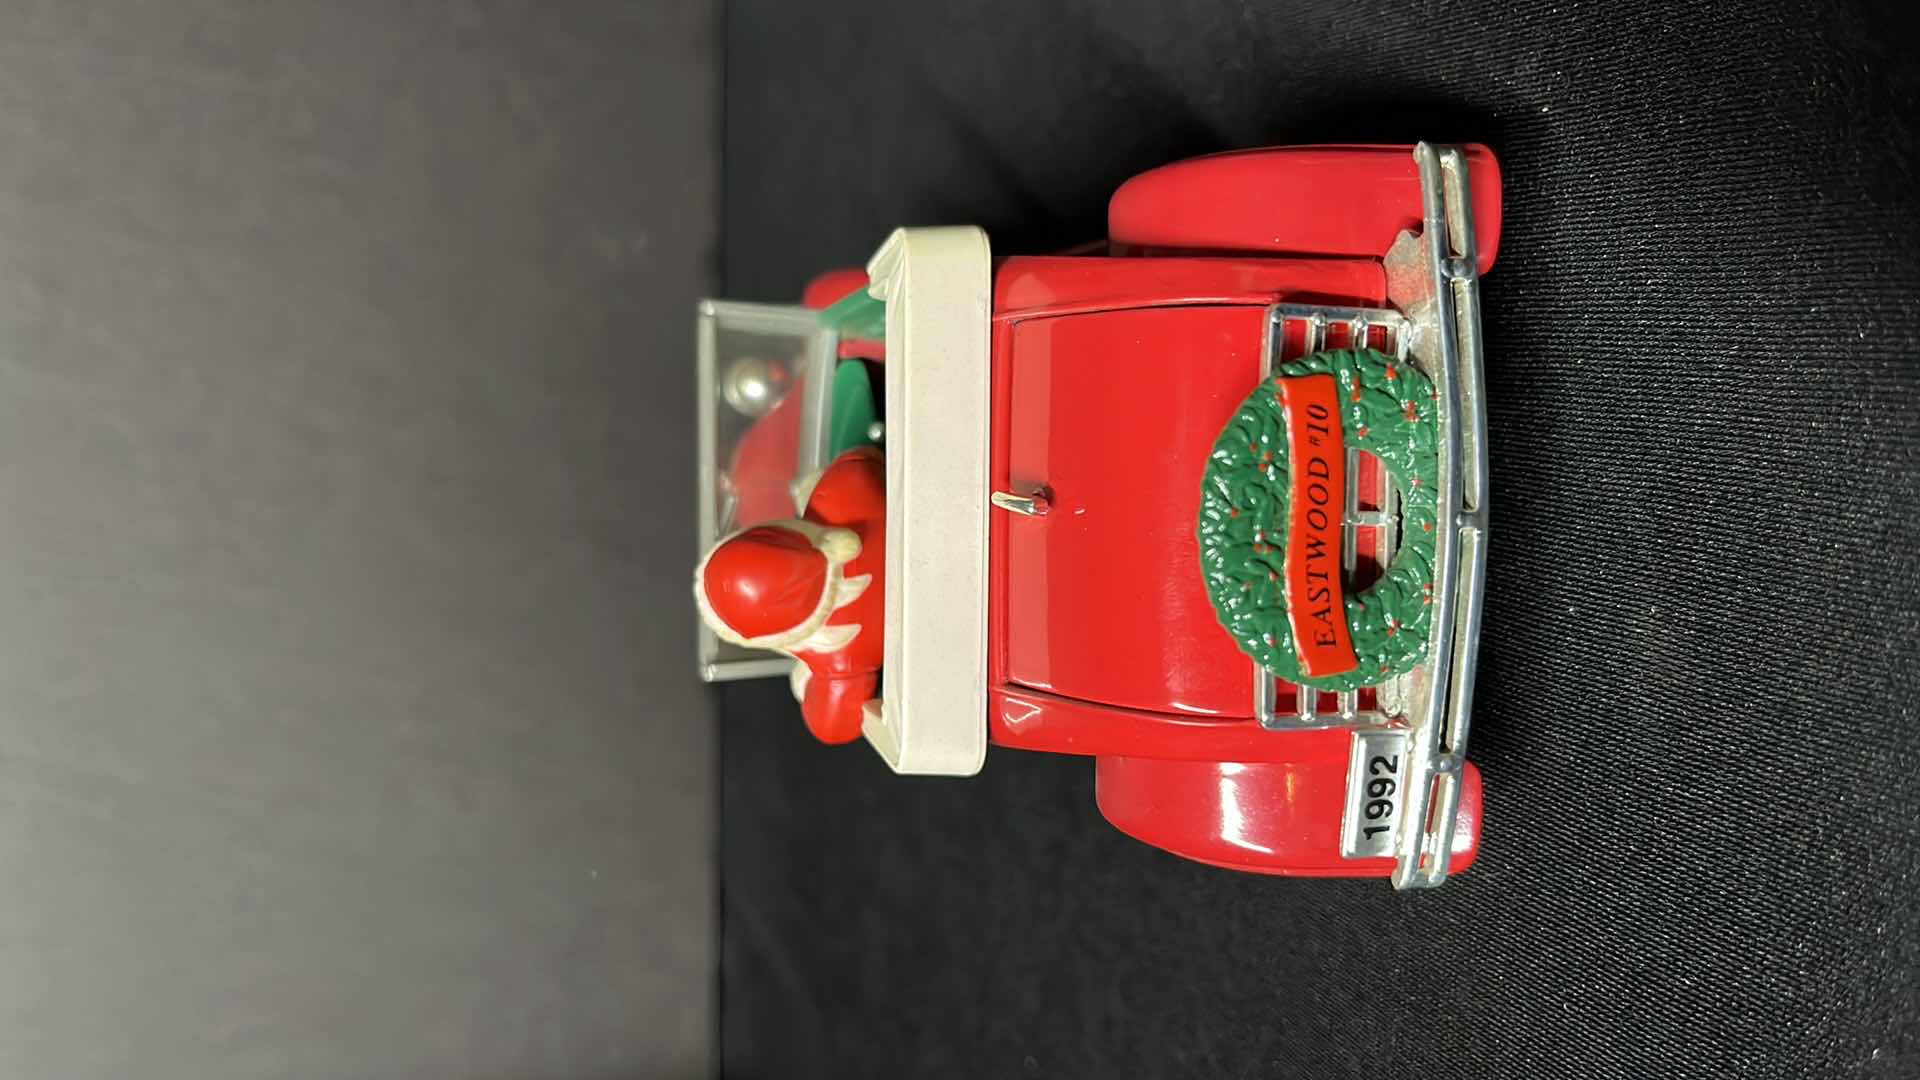 Photo 4 of THE EASTWOOD COMPANY DIE-CAST METAL GORD MODEL A 1992 SANTA’S ROADSTER LOCKING COIN BANK W KEY (STOCK #1928)